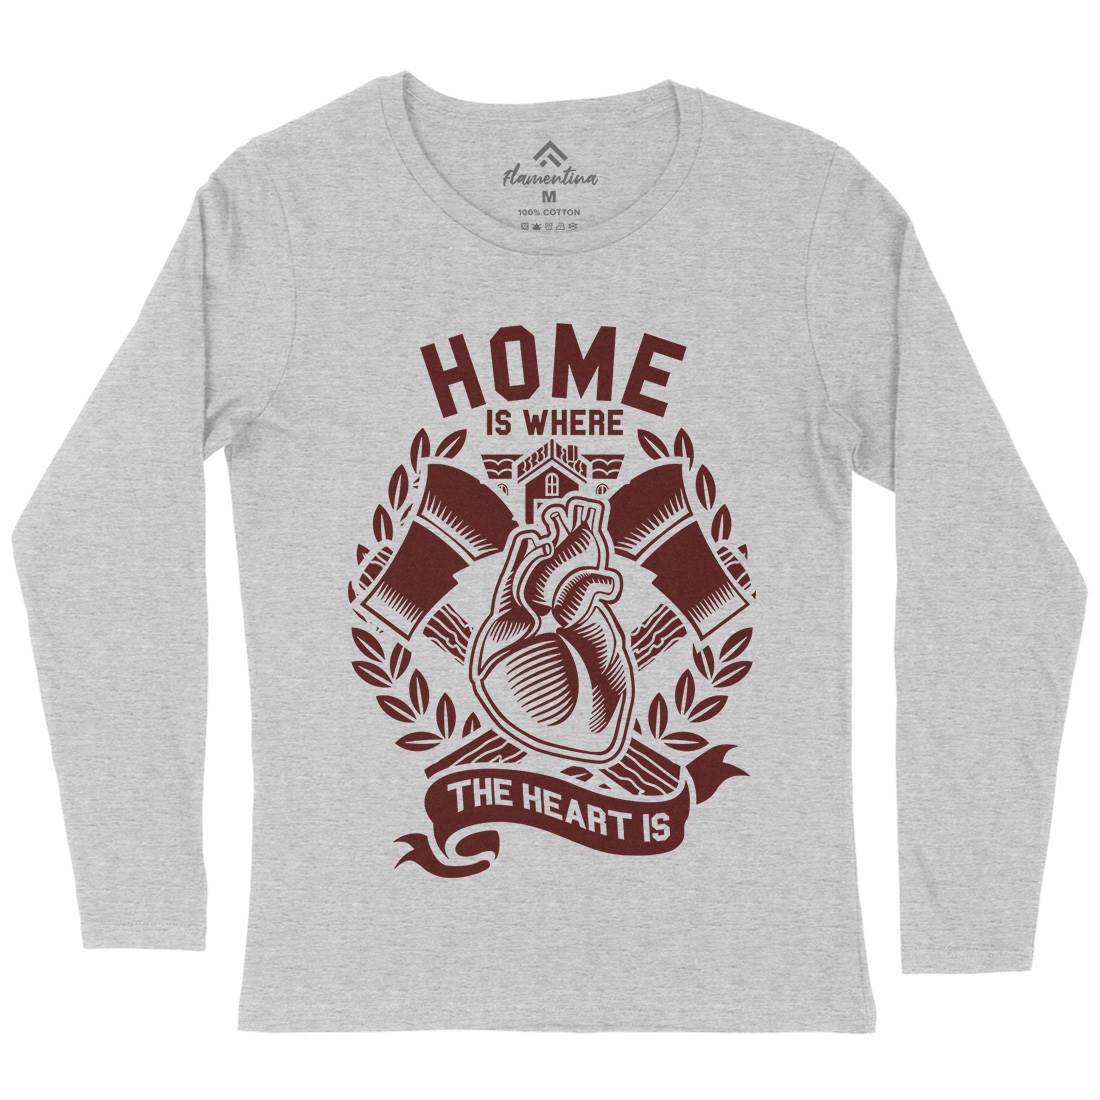 Home Womens Long Sleeve T-Shirt Quotes A241